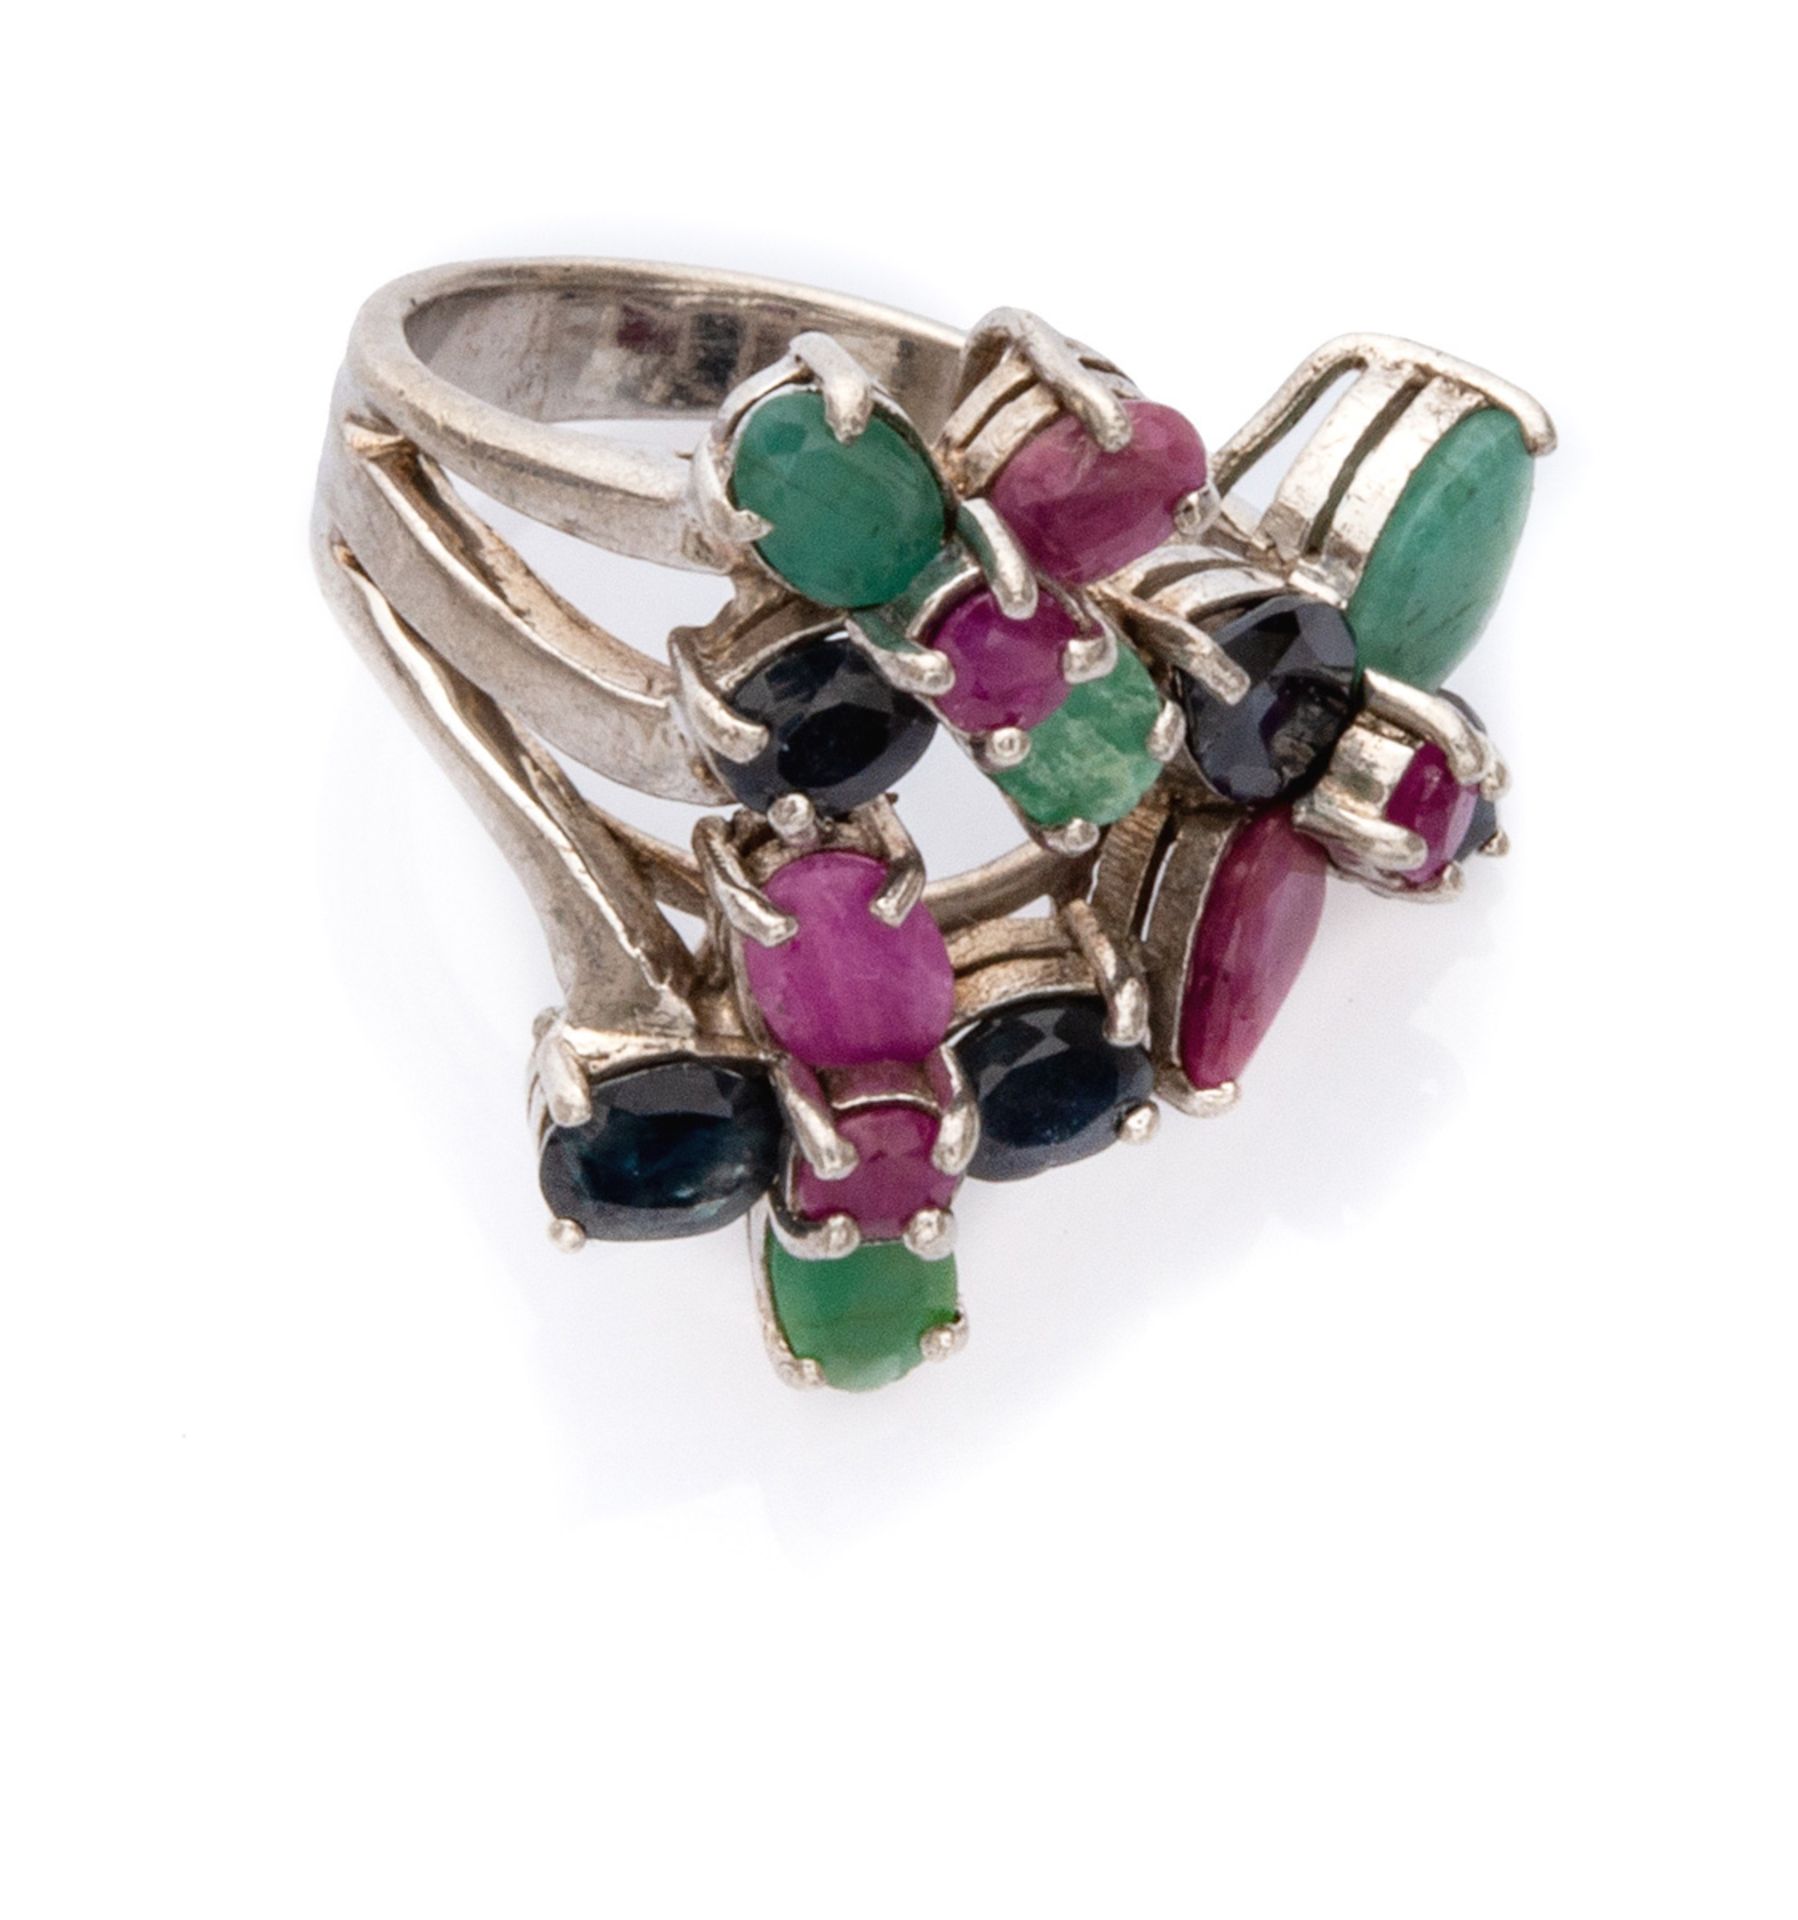 ATTRACTIVE RING in white gold 18 kts., with flowers decorated with sapphires, rubies and emeralds.